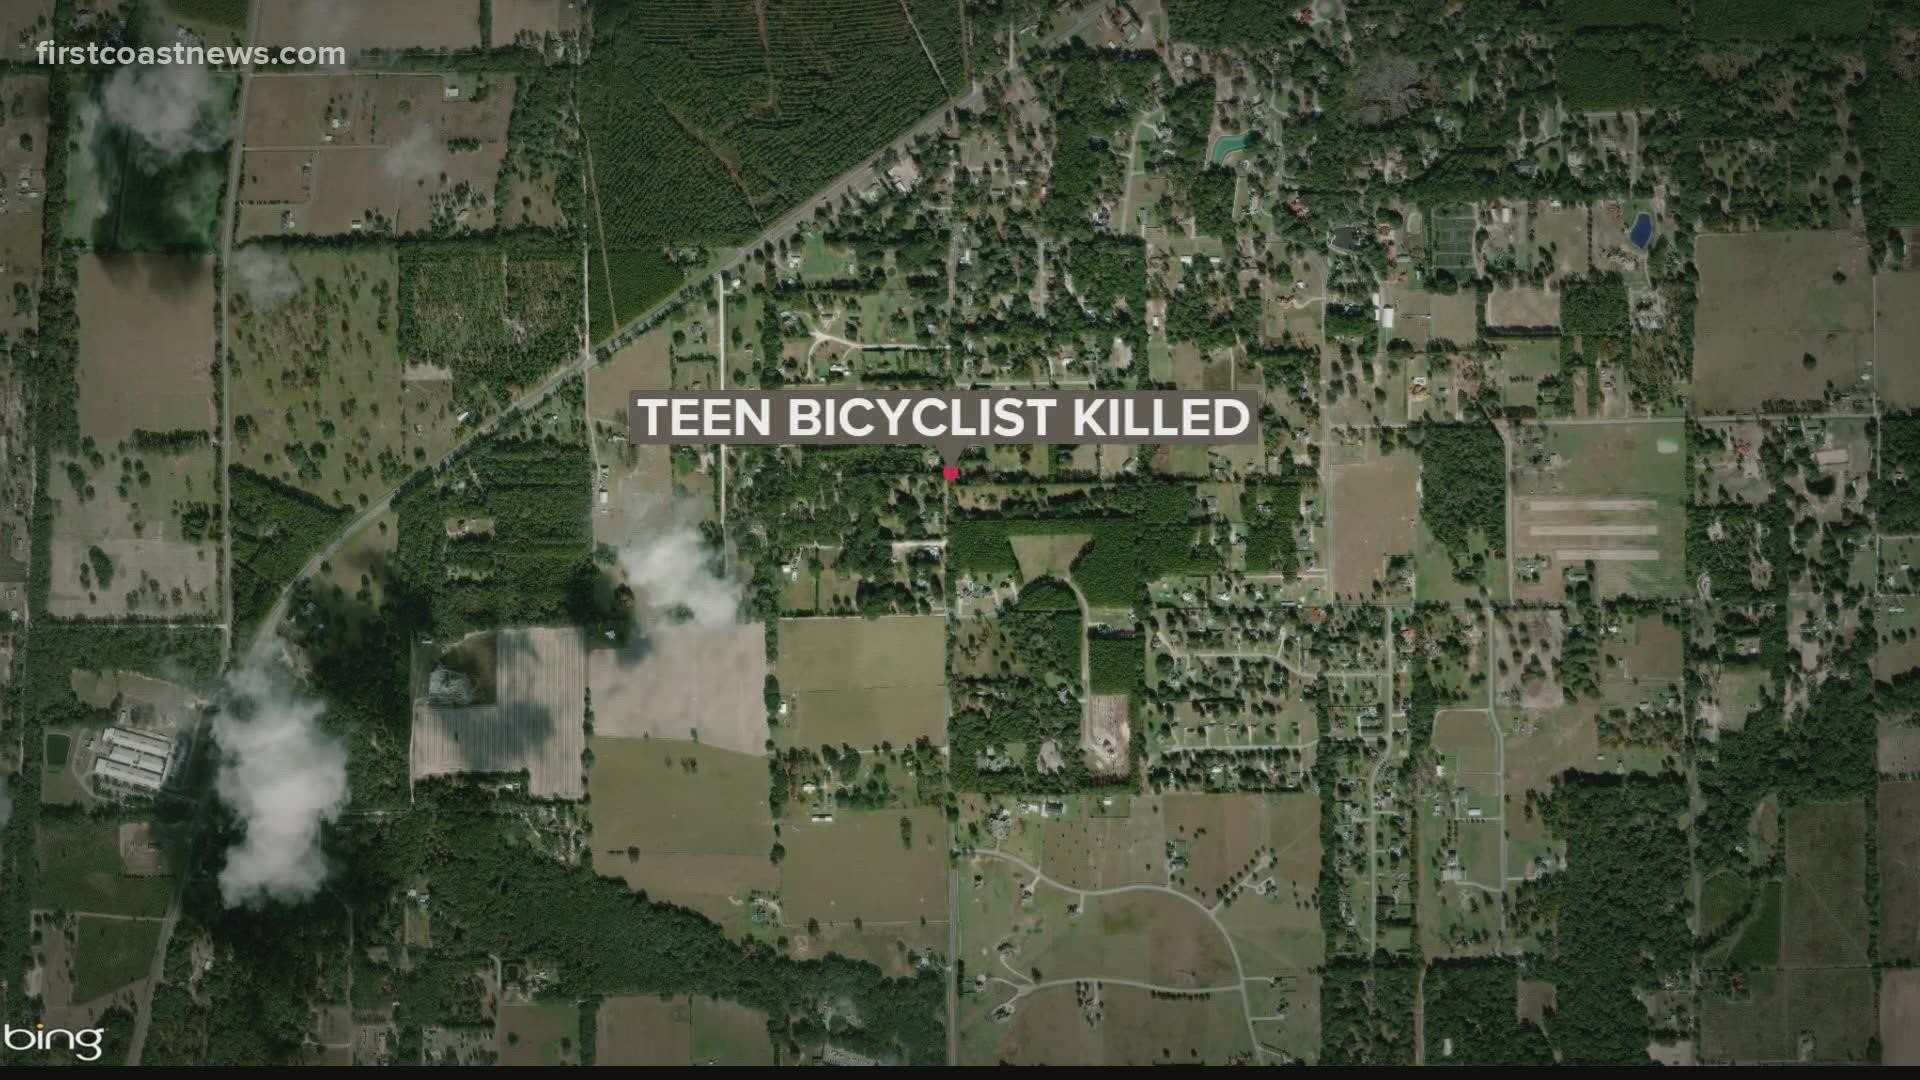 A car being driven by an 18-year-old girl hit the 15-year-old boy who was riding a bicycle, authorities said.